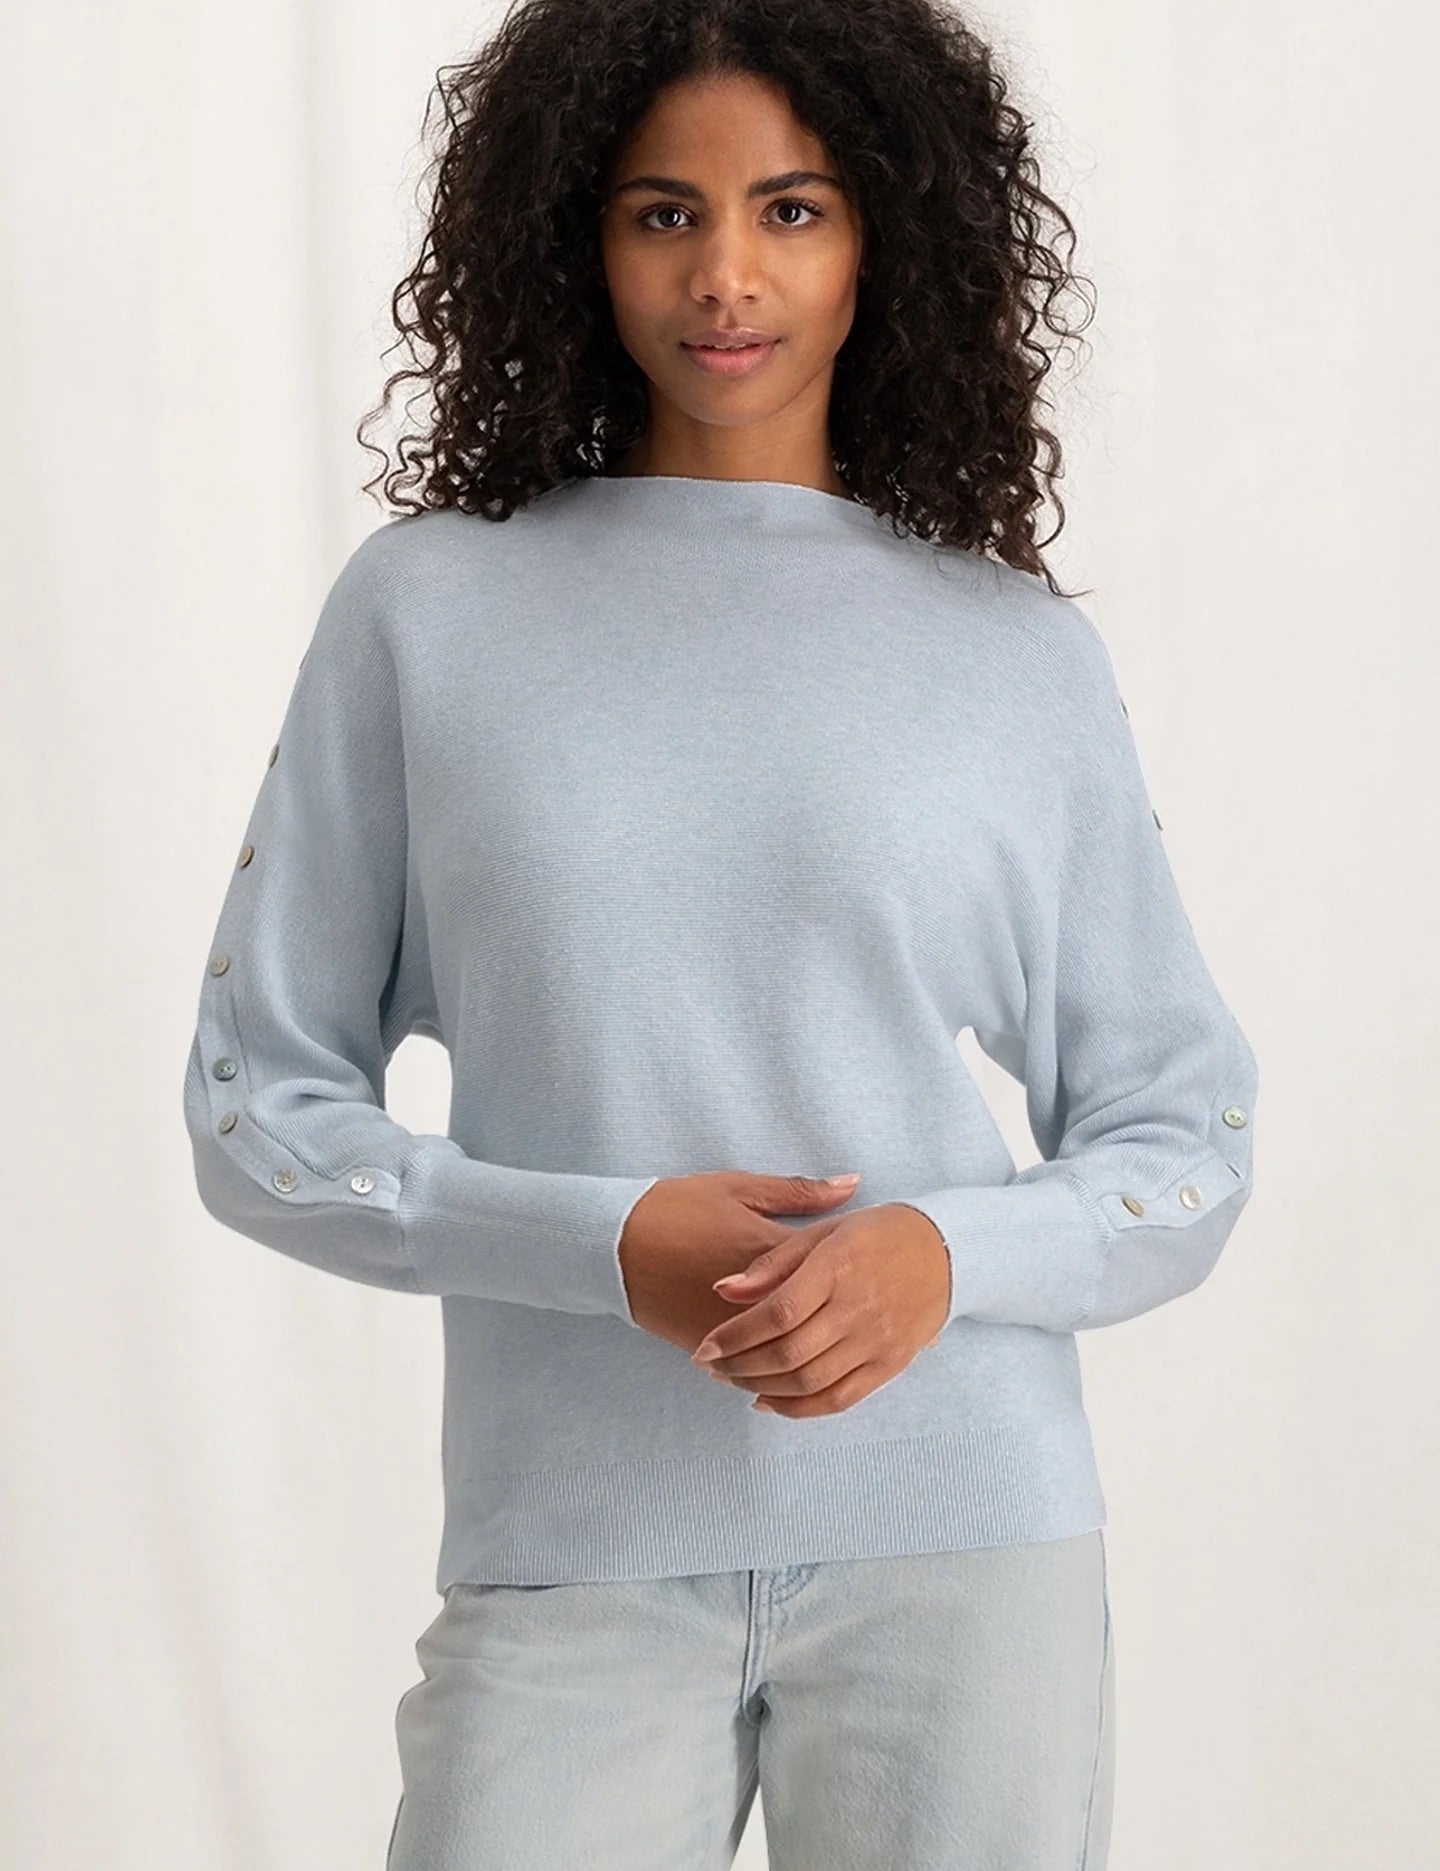 sweater-with-boatneck-long-sleeves-and-button-details-plein-air-blue-melange_2880x_jpg.jpg